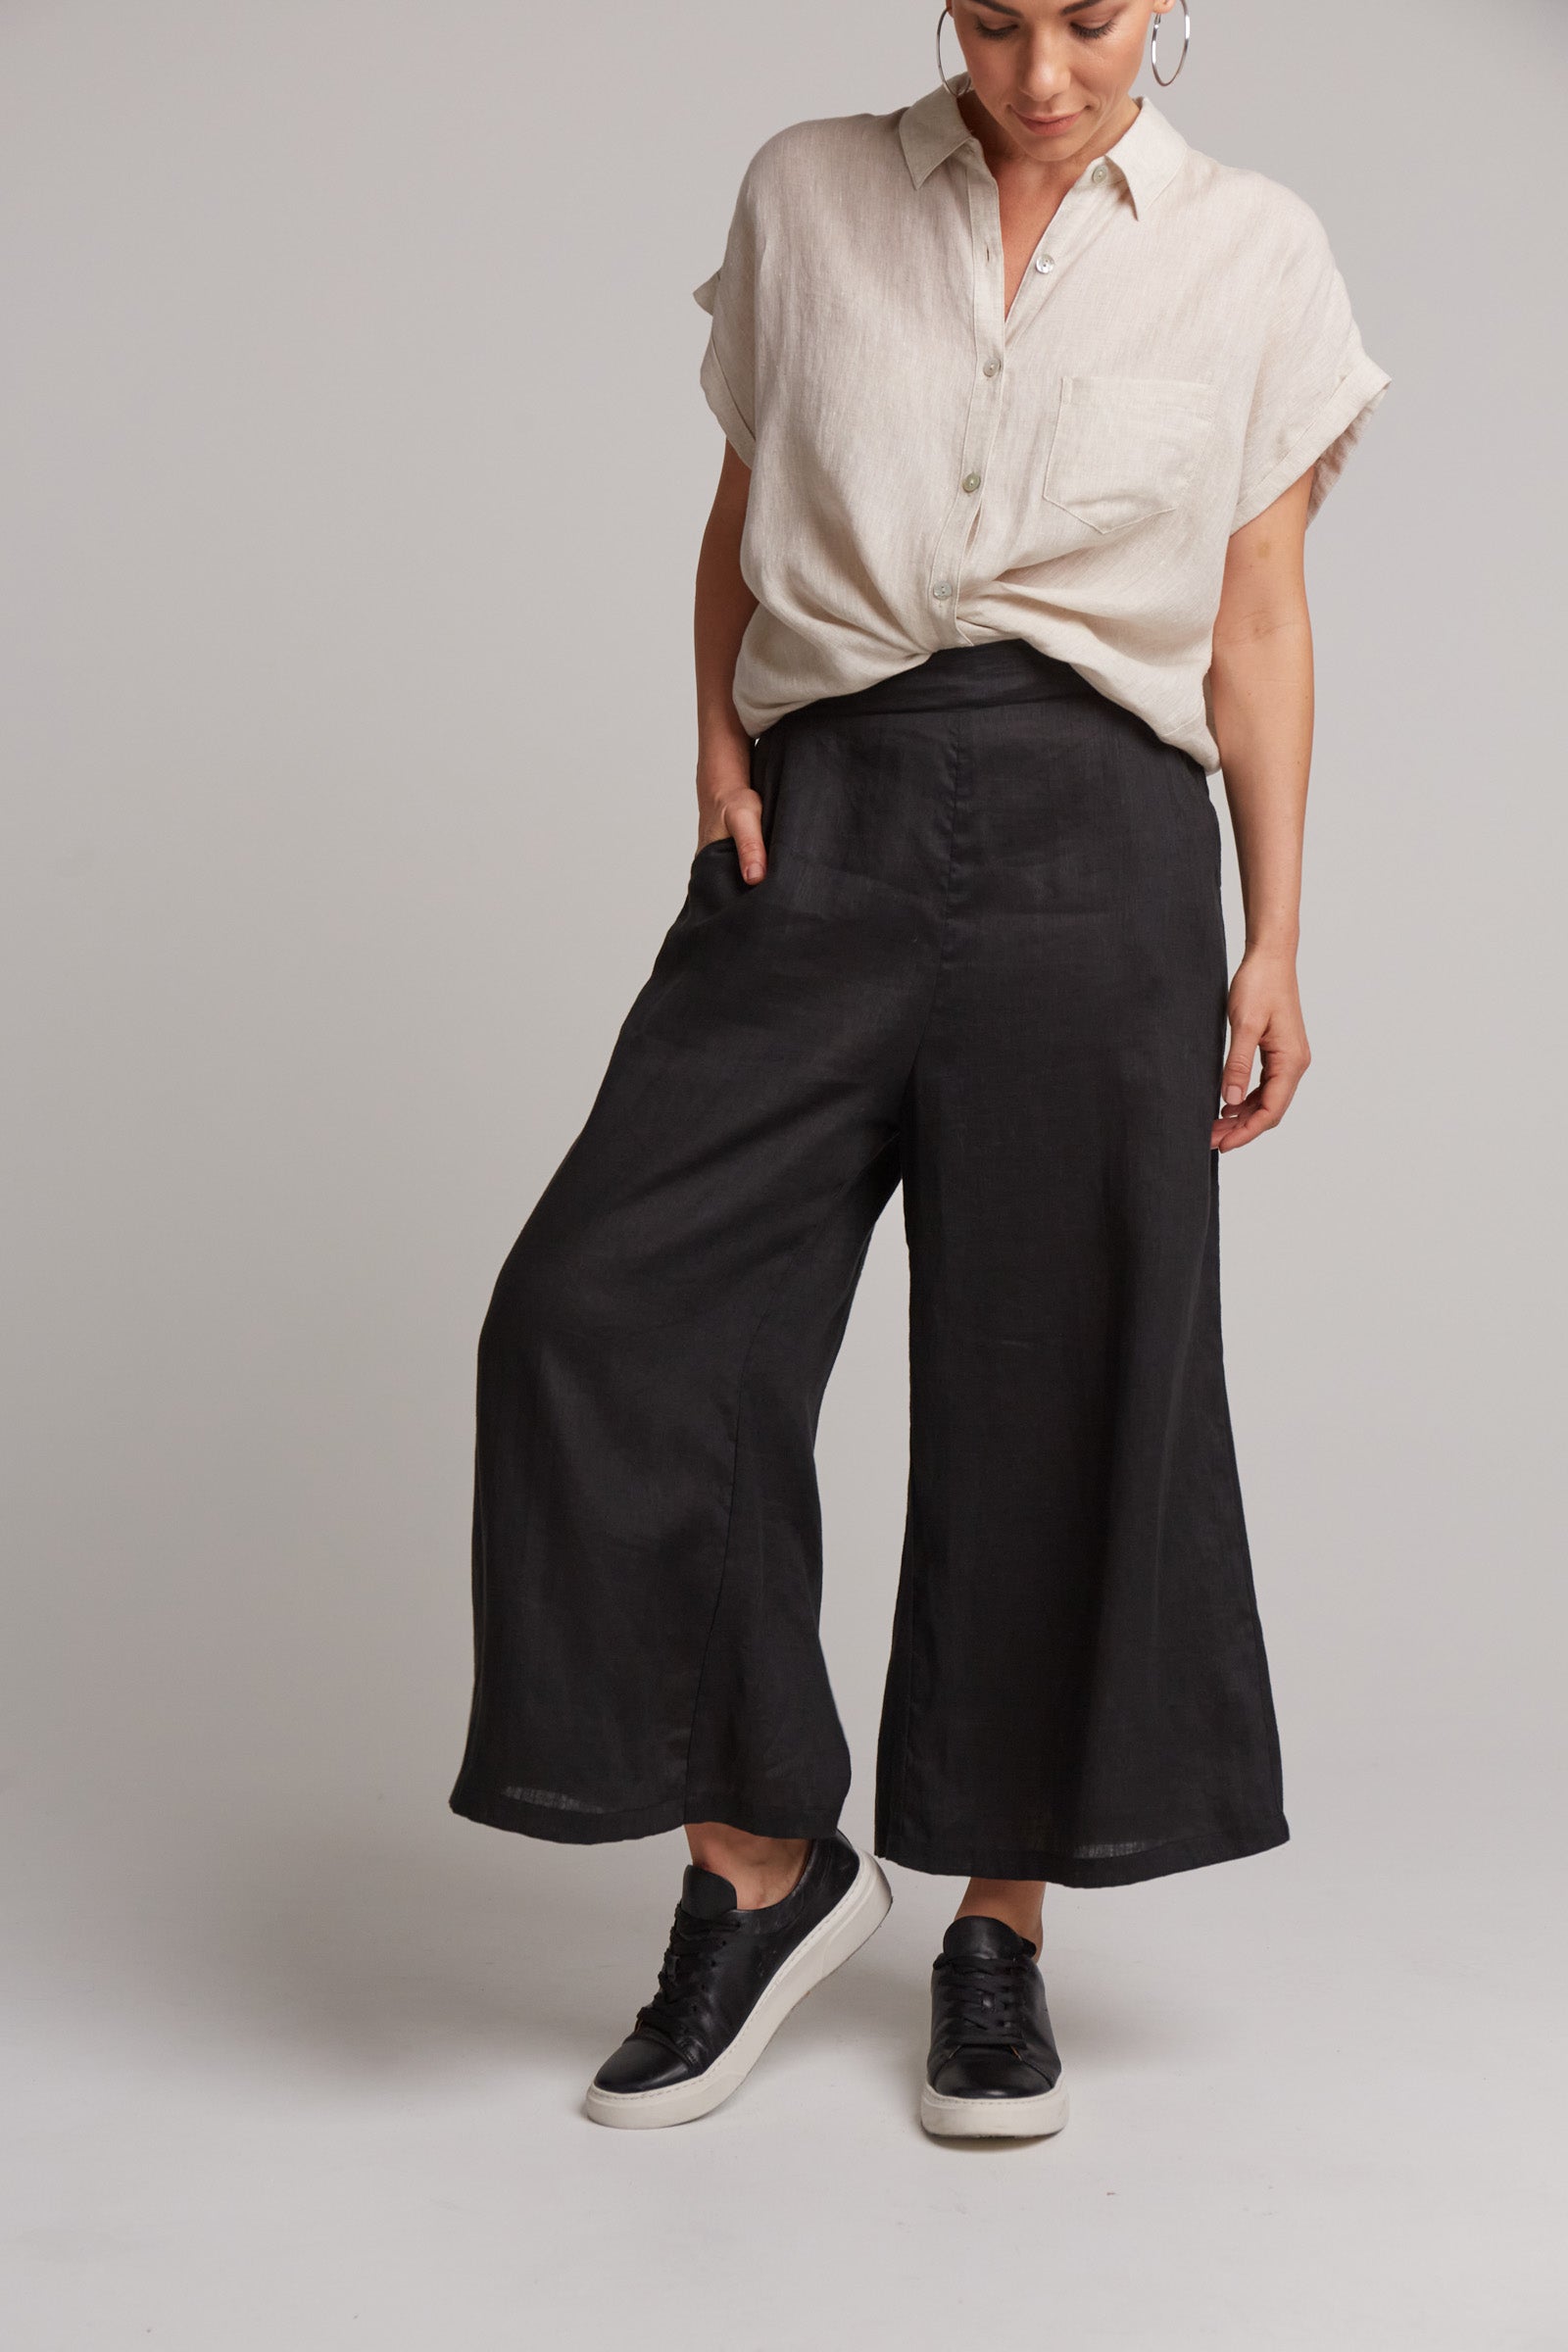 Studio Crop Pant - Ebony - eb&ive Clothing - Pant Relaxed Crop Linen